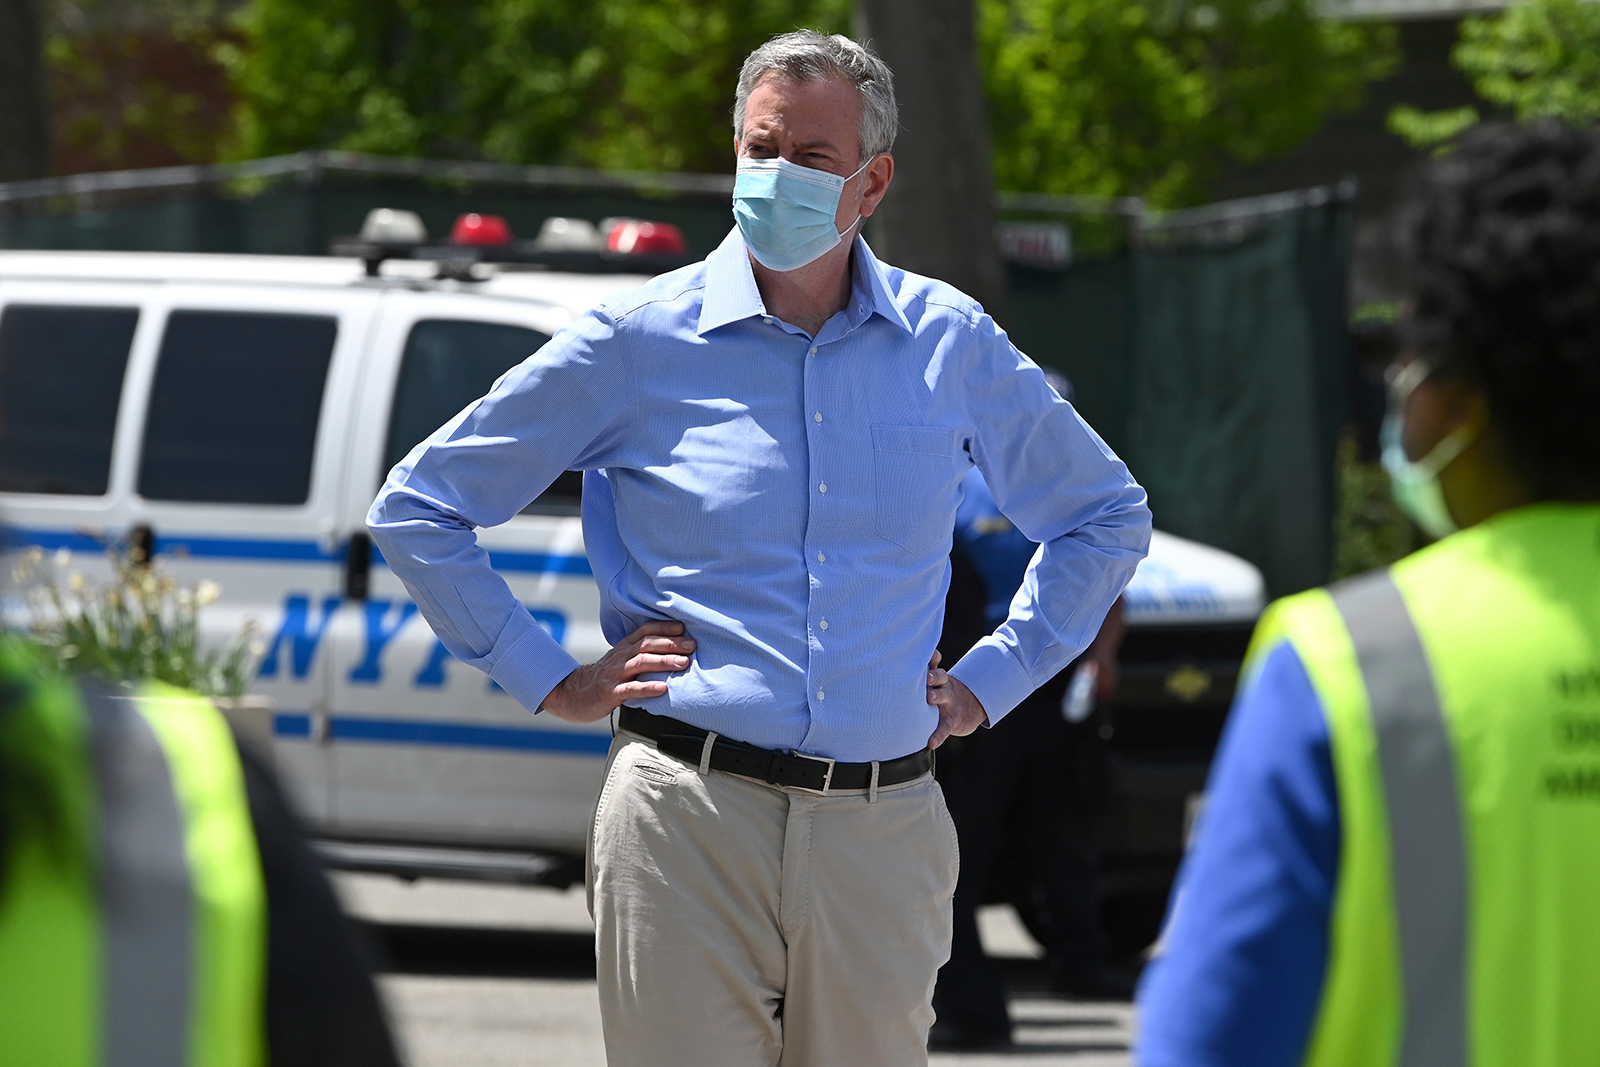 New York City Mayor Bill de Blasio speaks to members of the media before taking a walk through Flushing Meadows Corona Park to hand out free face masks to park goers, in the Queens borough of New York, on Saturday, May 16.